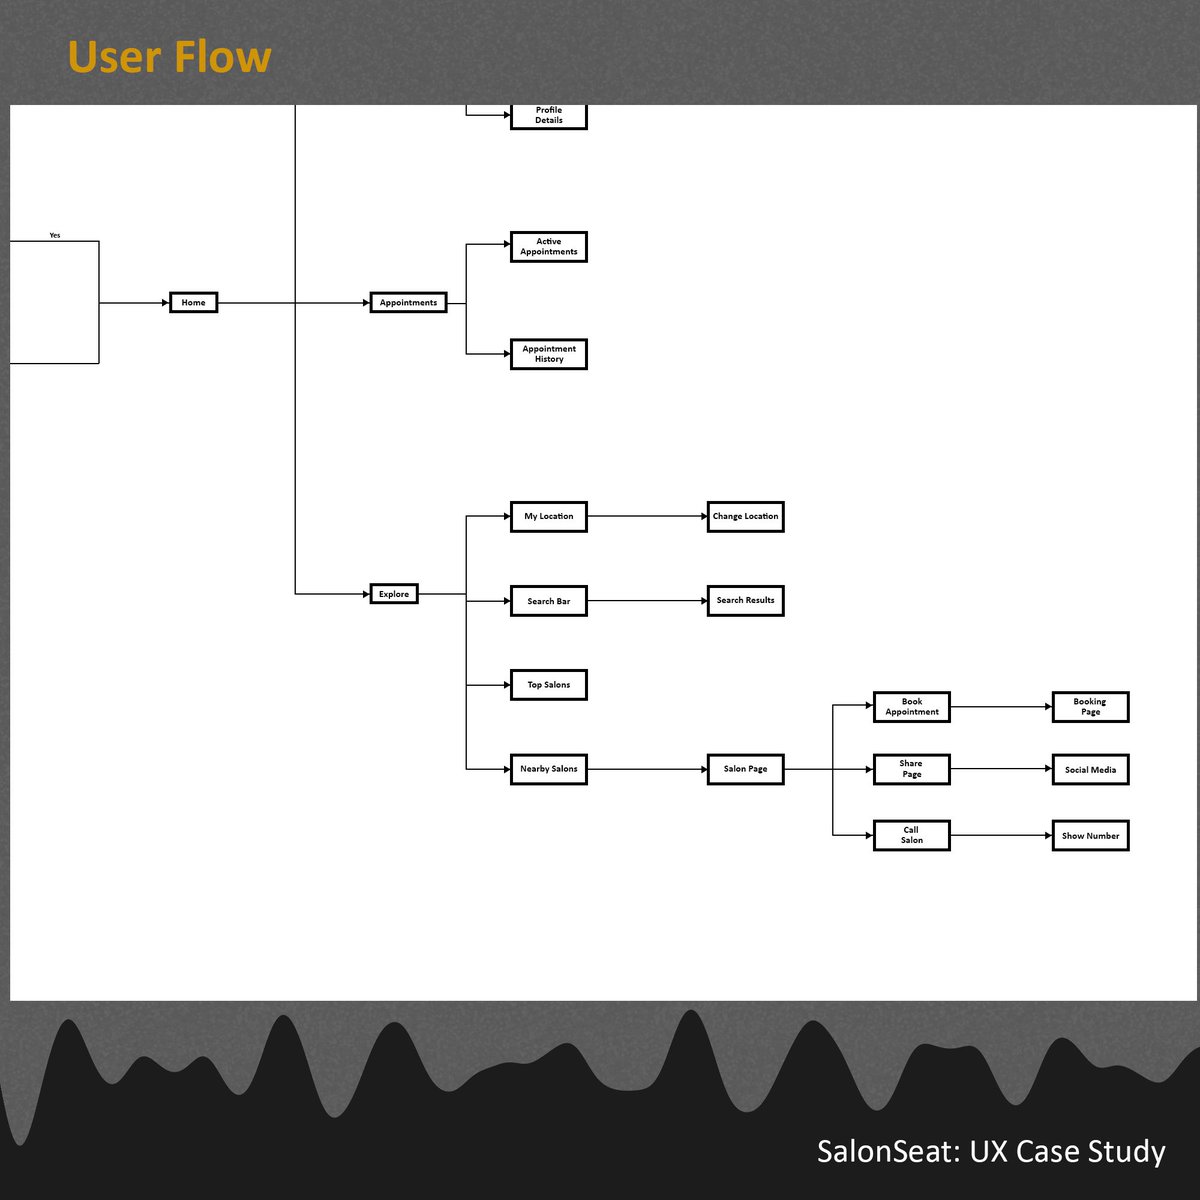 USER FLOWA User Flow points out every step a user takes in a system to achieve a specific goal. The goal could be to send a message, to post a status, etc. The user flow blueprints the paths taken to achieve that goal.